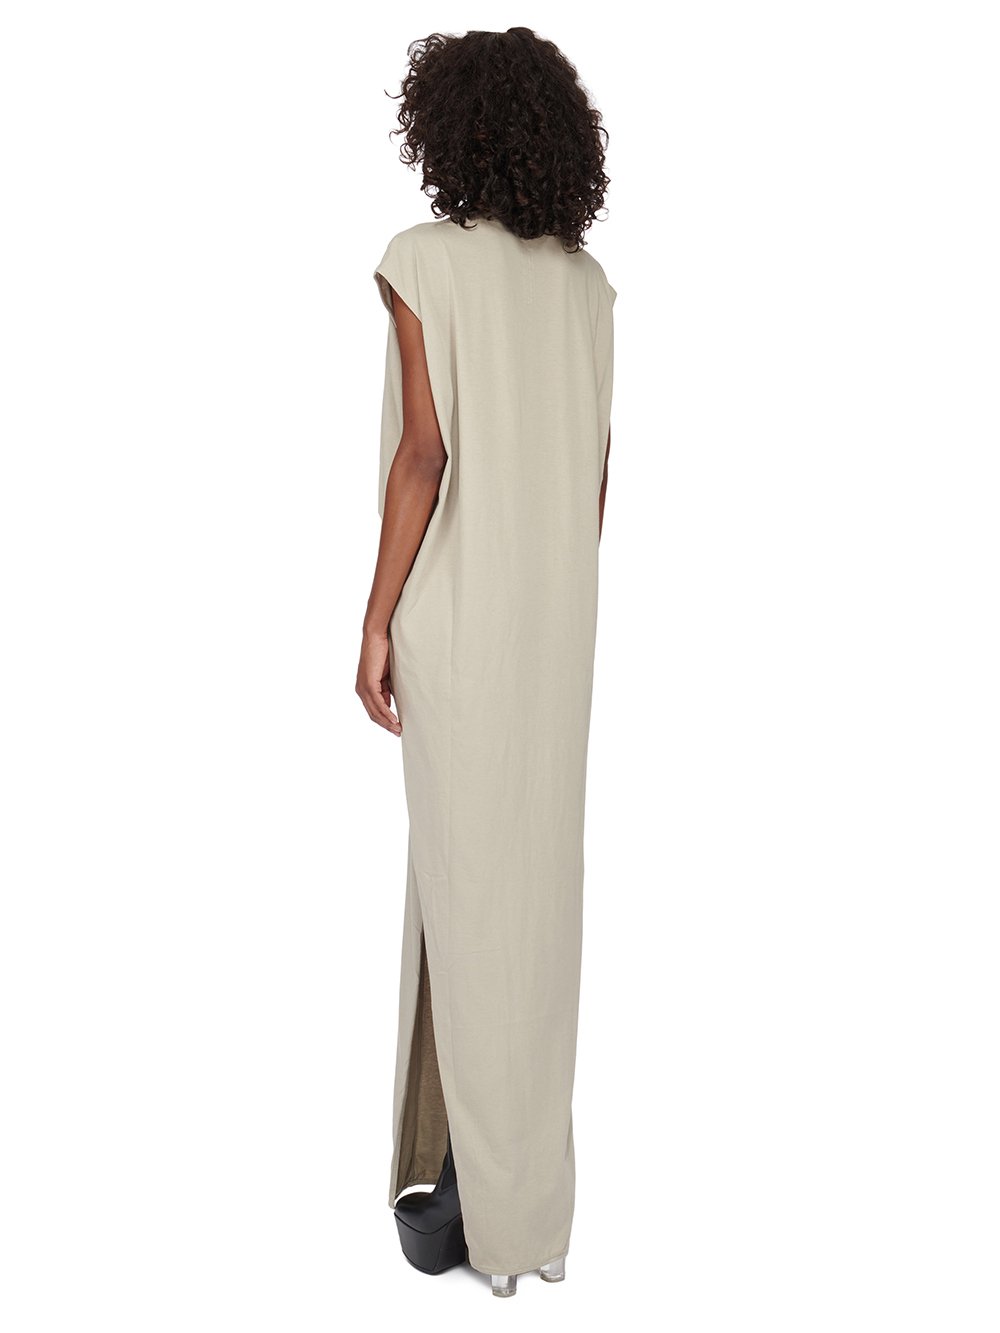 RICK OWENS FW23 LUXOR ARROWHEAD GOWN IN PEARL CLASSIC COTTON JERSEY